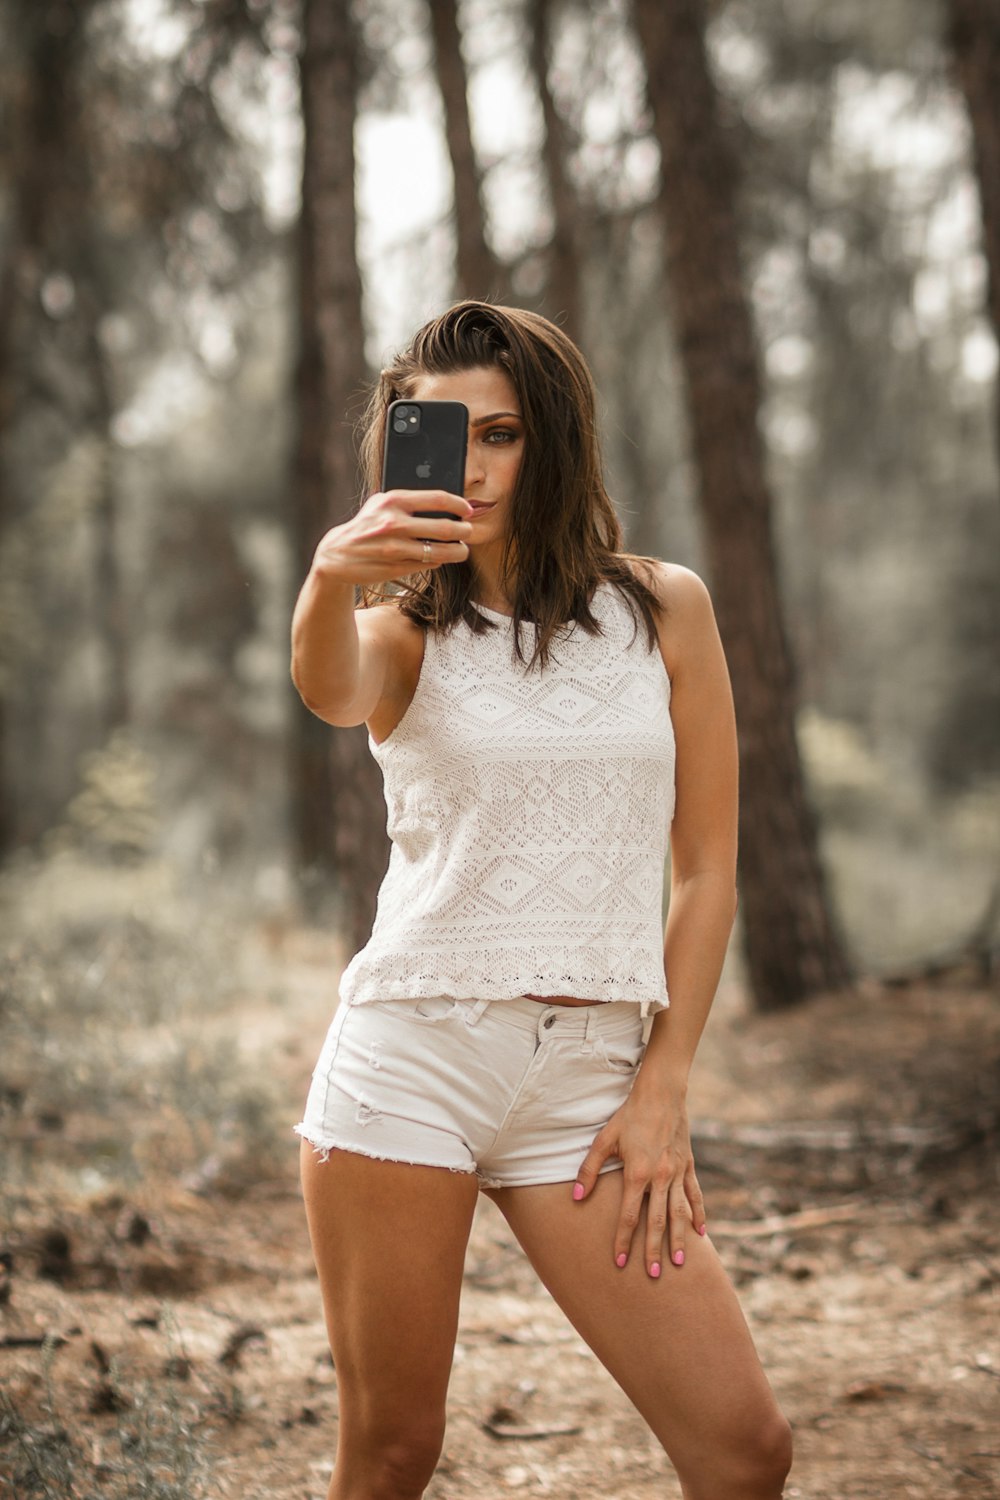 woman in white tank top holding black smartphone